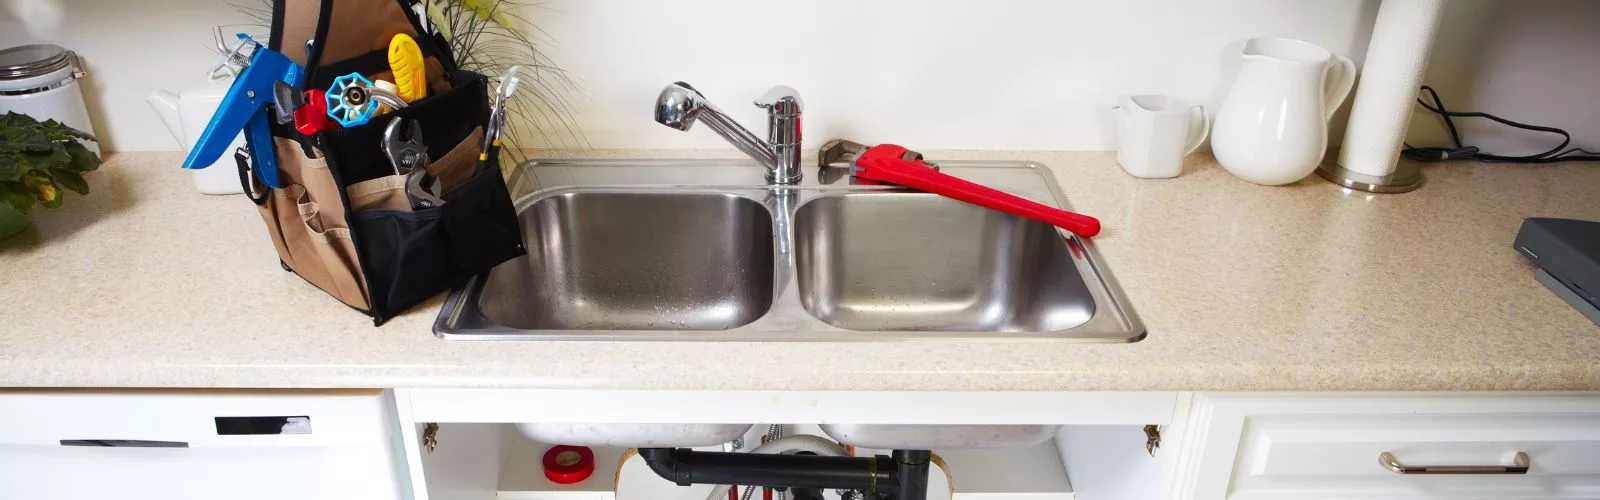 Kitchen Plumbing Renovations & Repairs In Edmonton by Hot To Cold